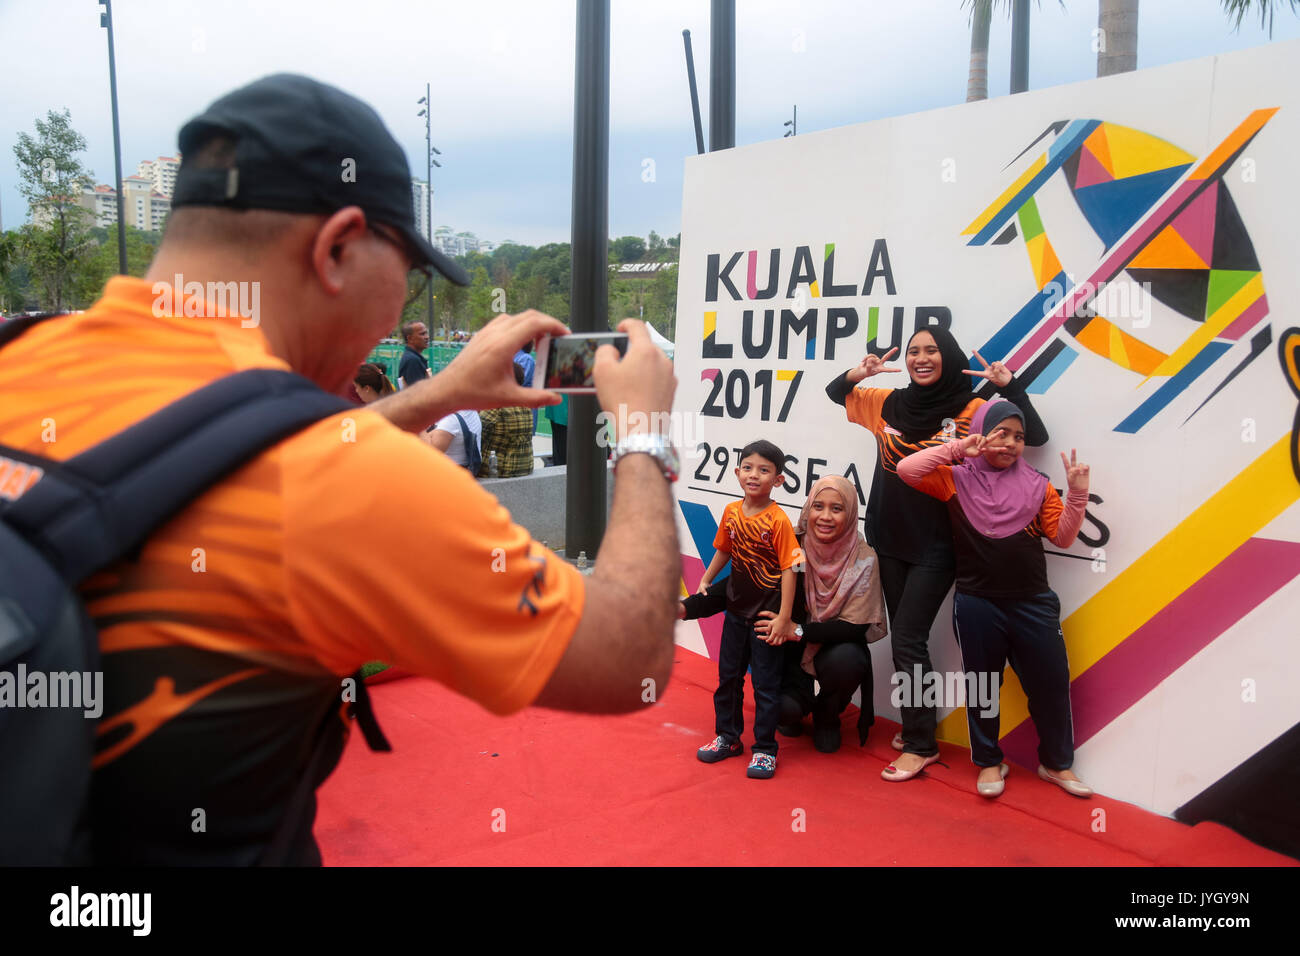 Malaysian family taking picture with the official SEA games signboard during opening ceremony of the 29th SEA games. Credit: Calvin Chan/Alamy Live News Stock Photo